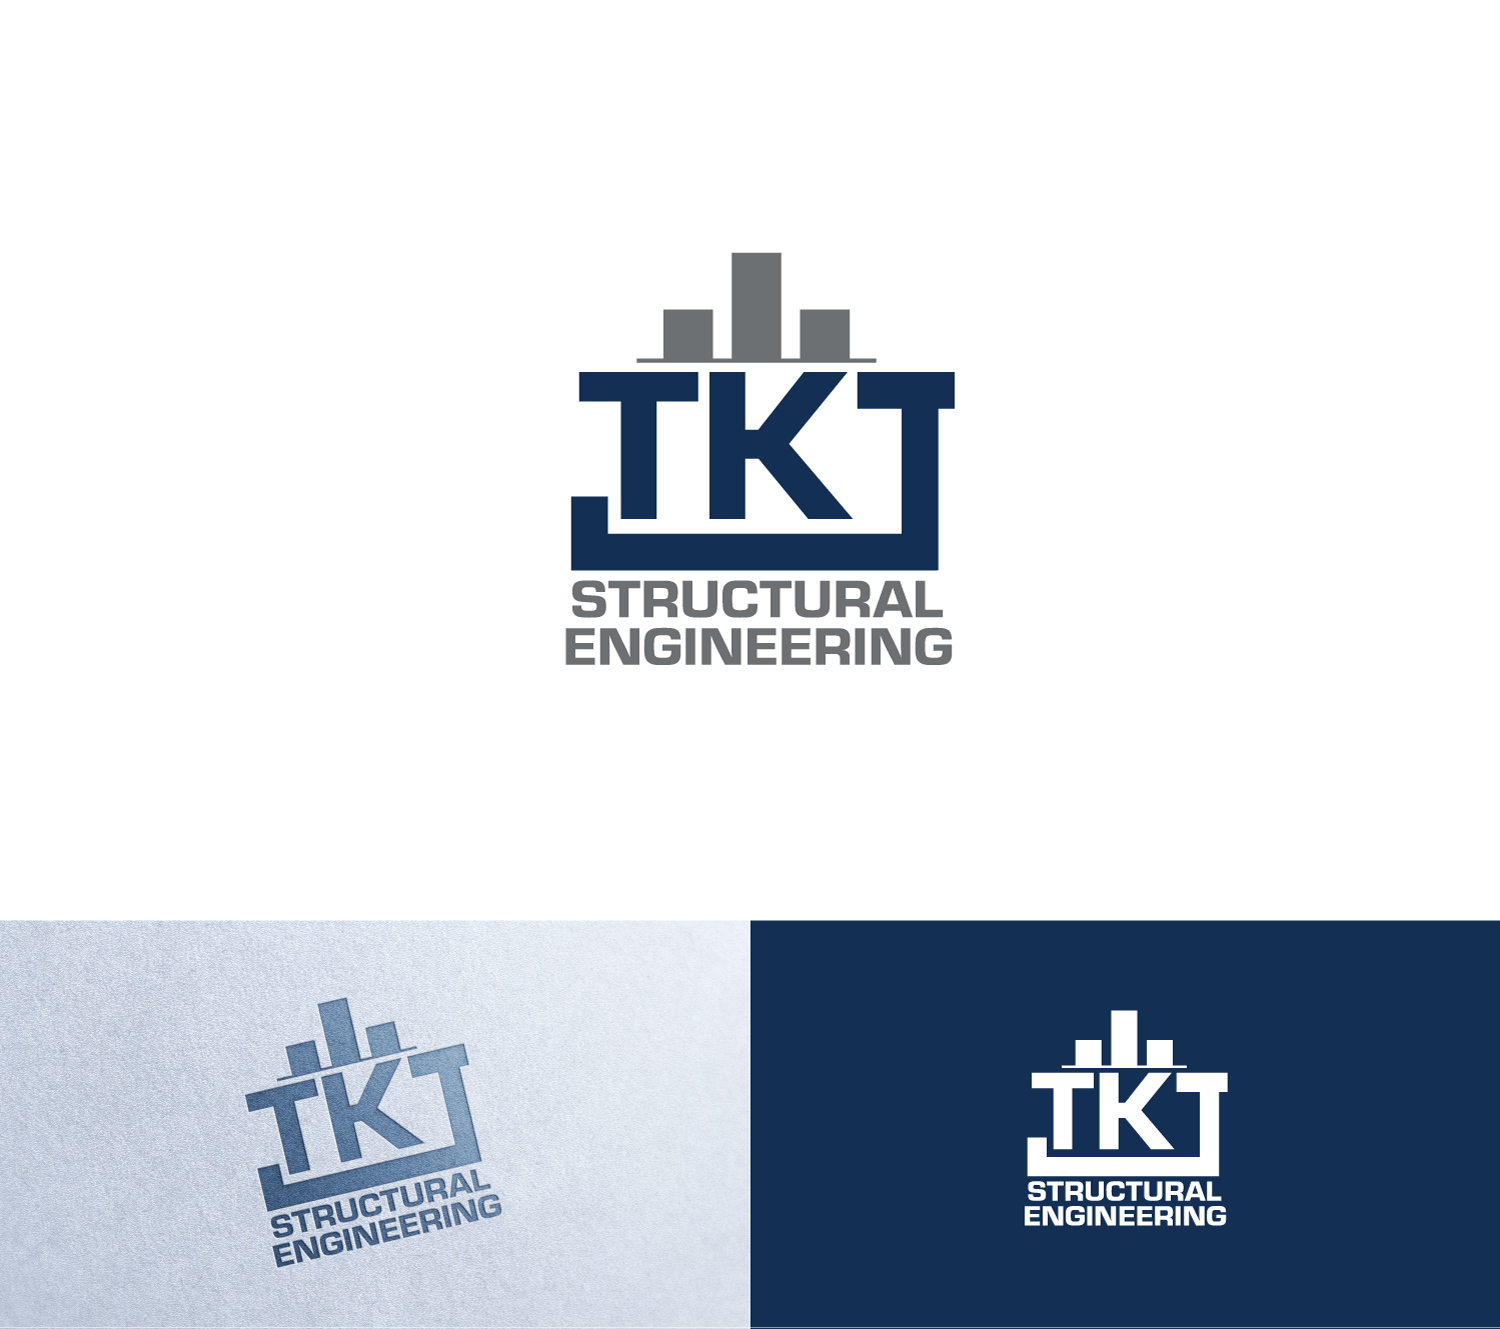 Structural Engineering Logo - Professional, Serious, Civil Engineer Logo Design for TKJ Structural